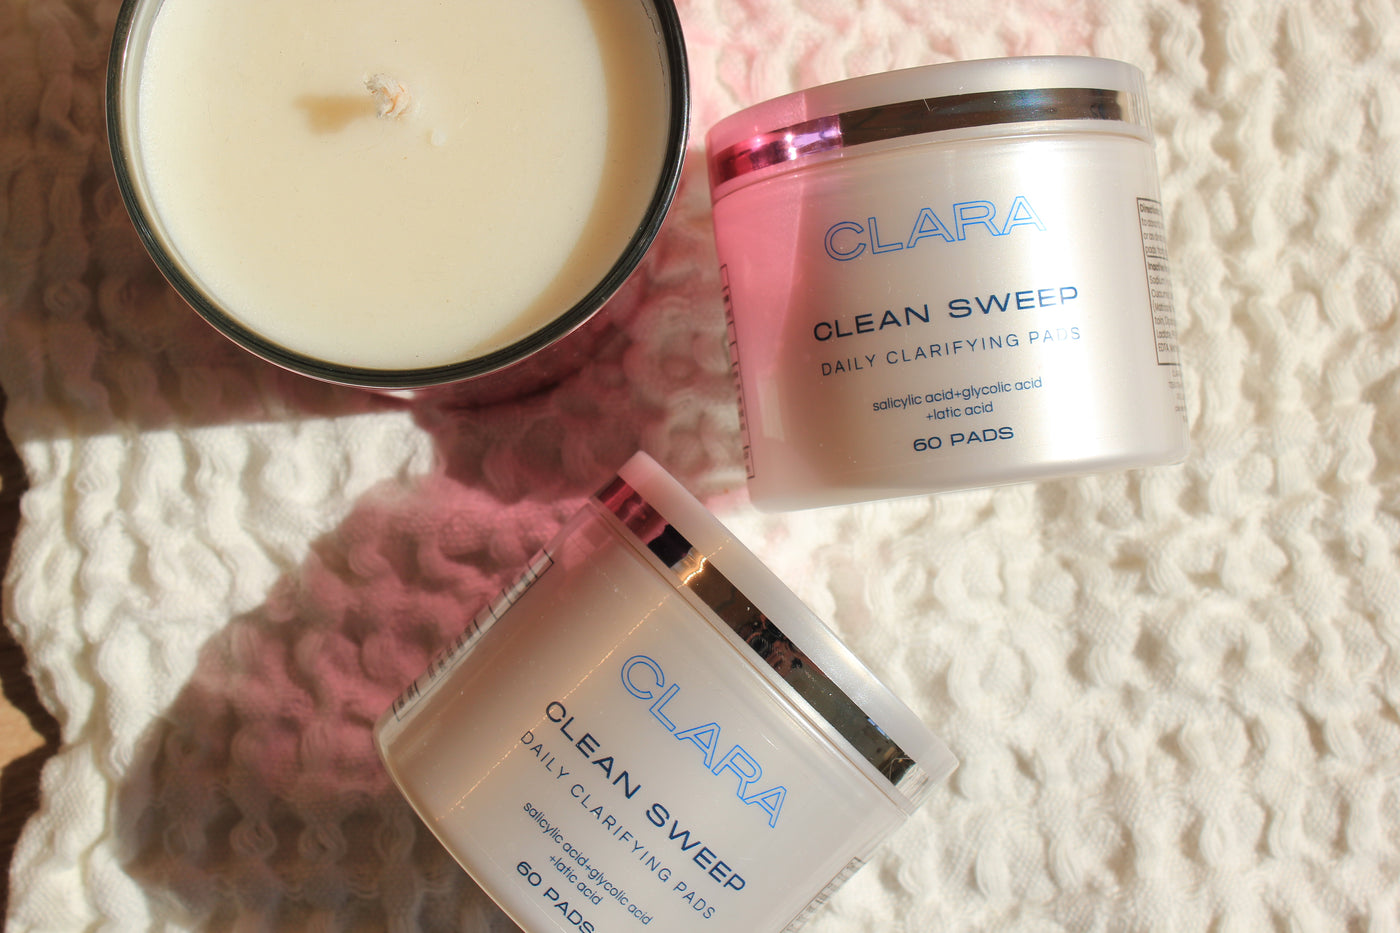 Clean Sweep Pads: Hydroxy Acids that Gently Exfoliate and Cleanse for Clear and Radiant Skin